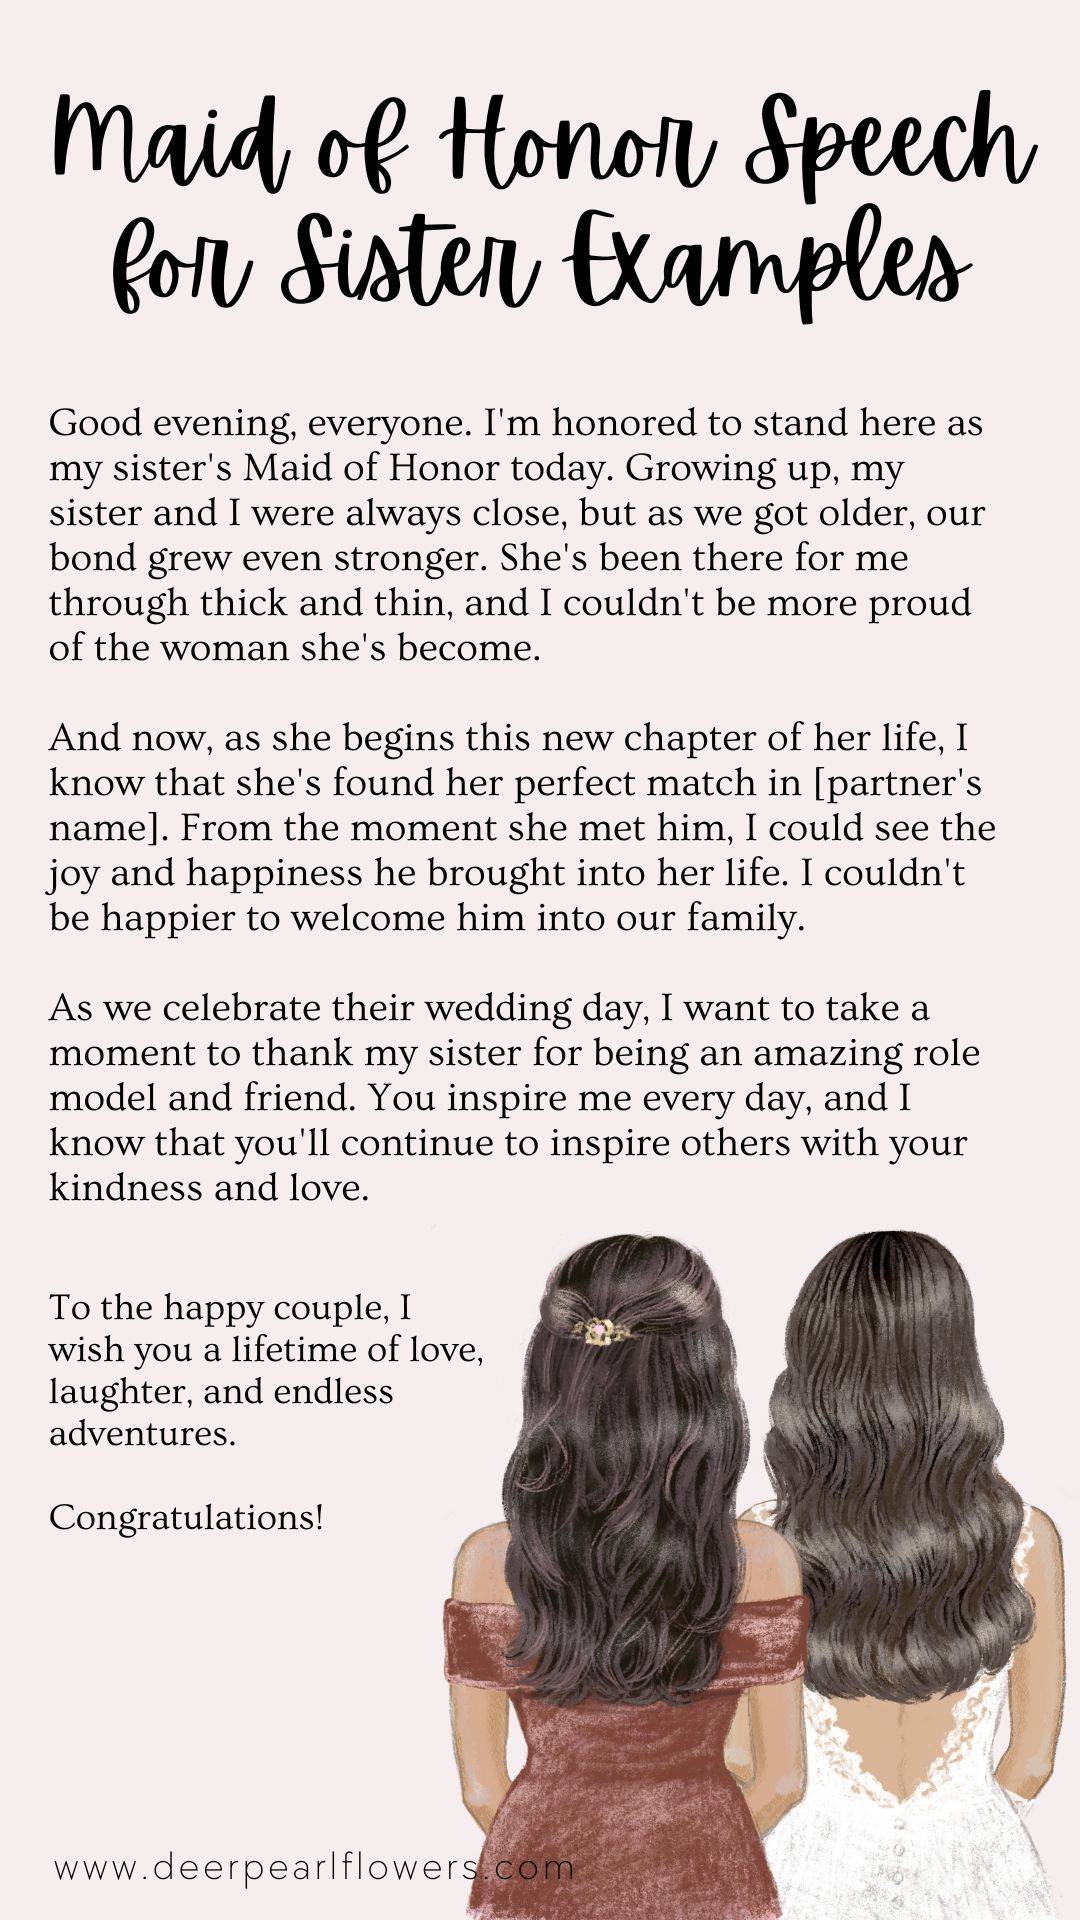 example-of-maid-of-honor-speech-for-sister